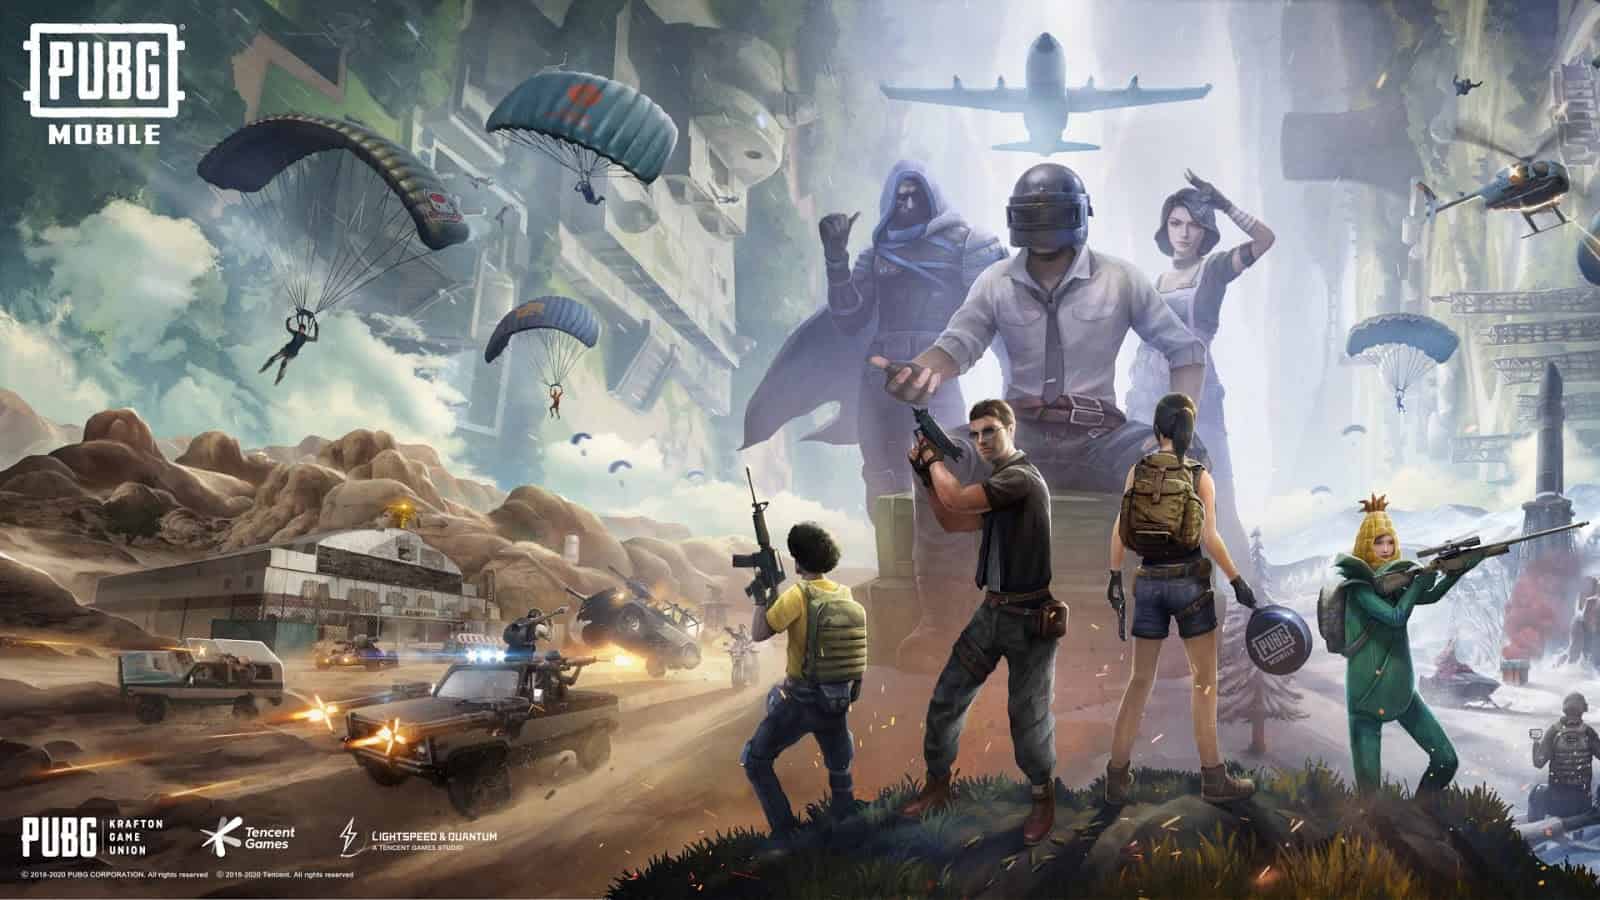 PUBG Mobile Celebrates 3rd Anniversary With New Community Event